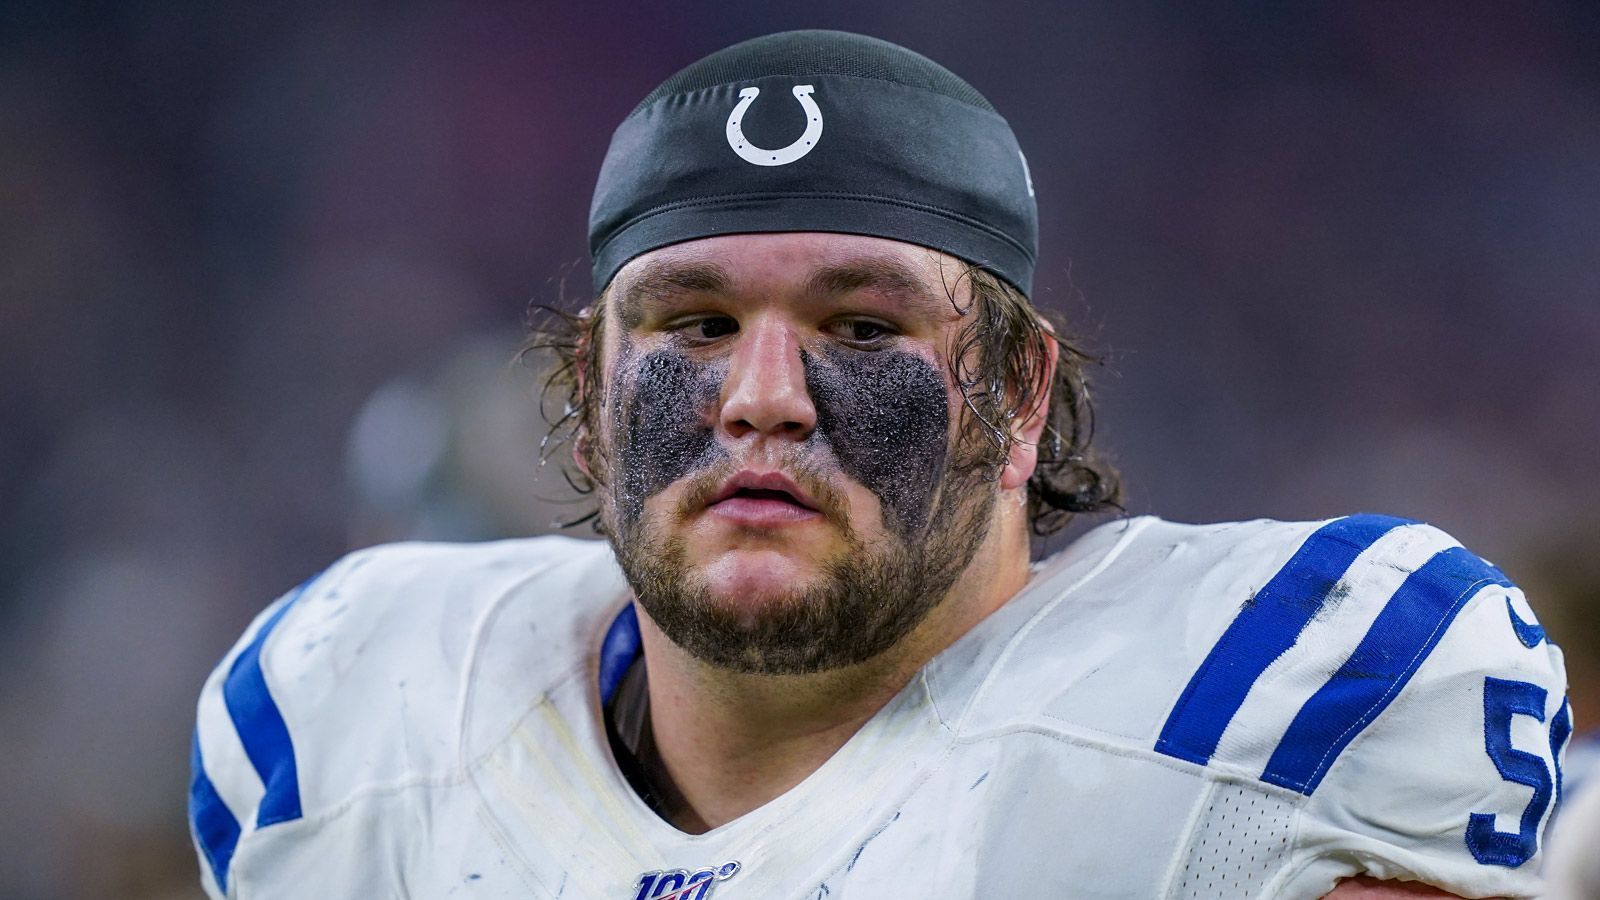 
                <strong>Indianapolis Colts</strong><br>
                Overall Ratings:Quenton Nelson – 95 - DeForest Buckner – 88 - Darius Leonard – 87 - T.Y. Hilton – 86 - Anthony Castonzo – 85 - Ryan Kelly – 85 - Marlon Mack – 85 - Justin Houston – 84 - Philip Rivers – 84 - Malik Hooker – 82
              